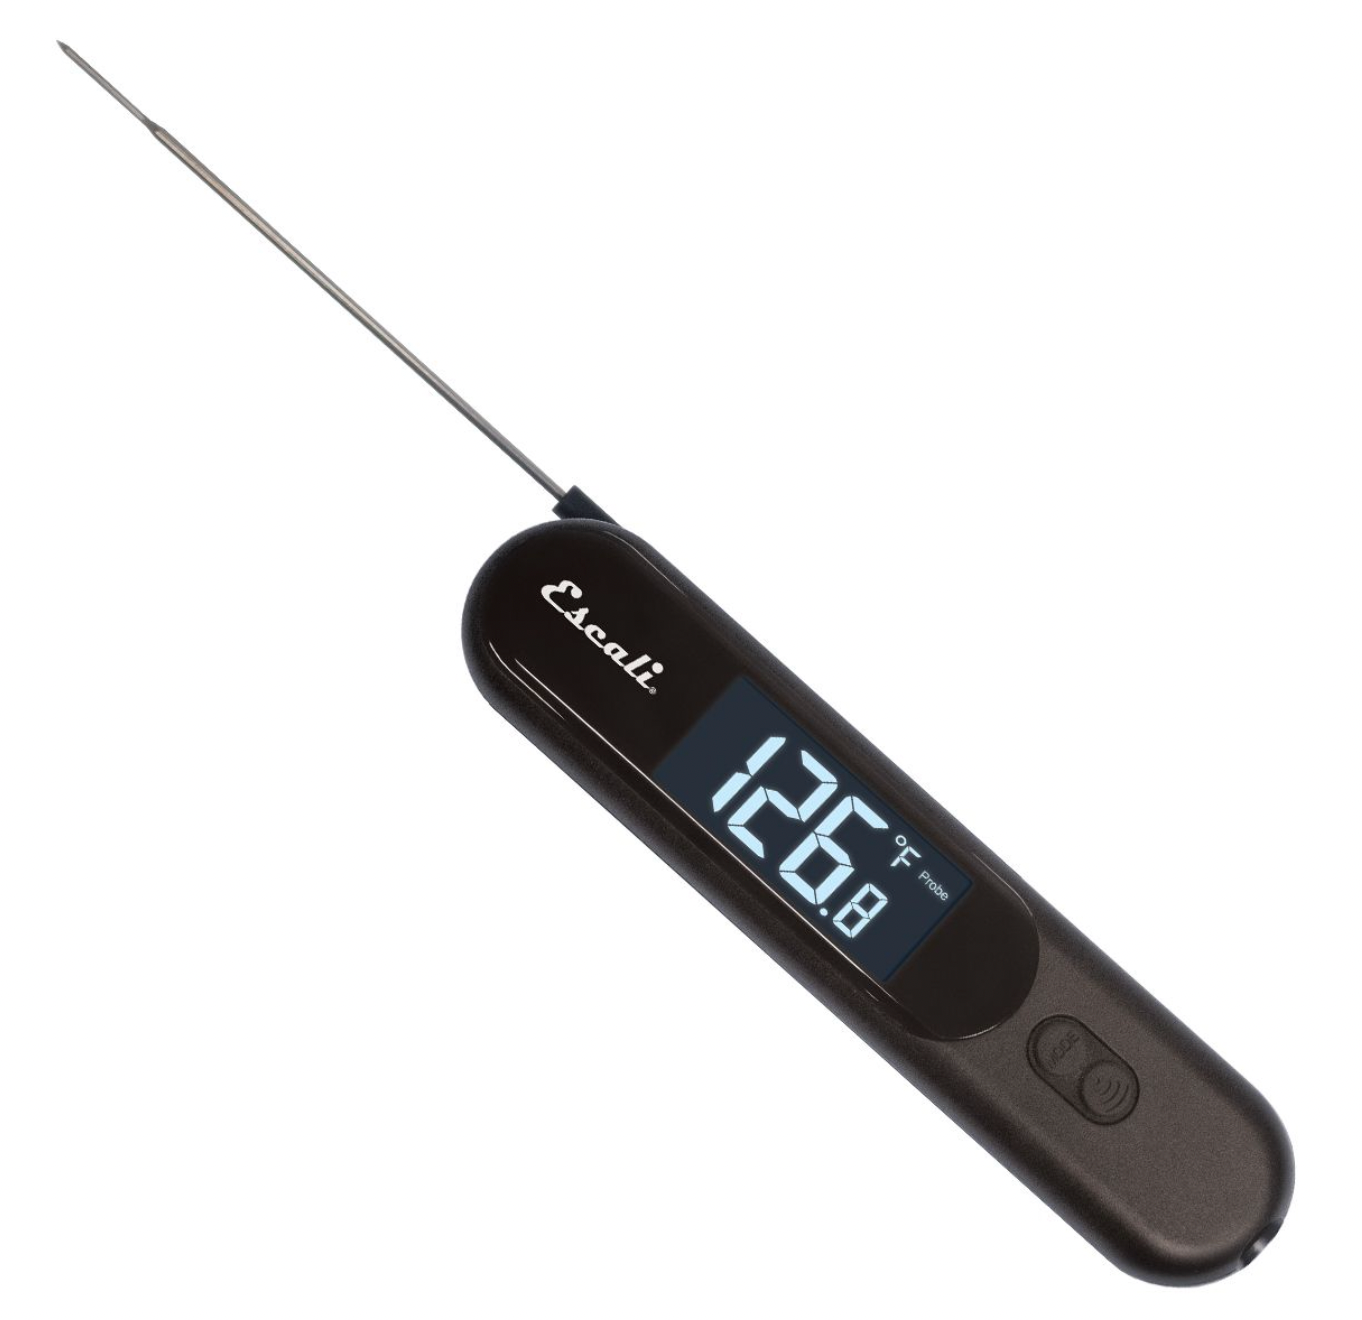 Escali 2-in-1 Infrared Surface and Folding Probe Digital Thermometer